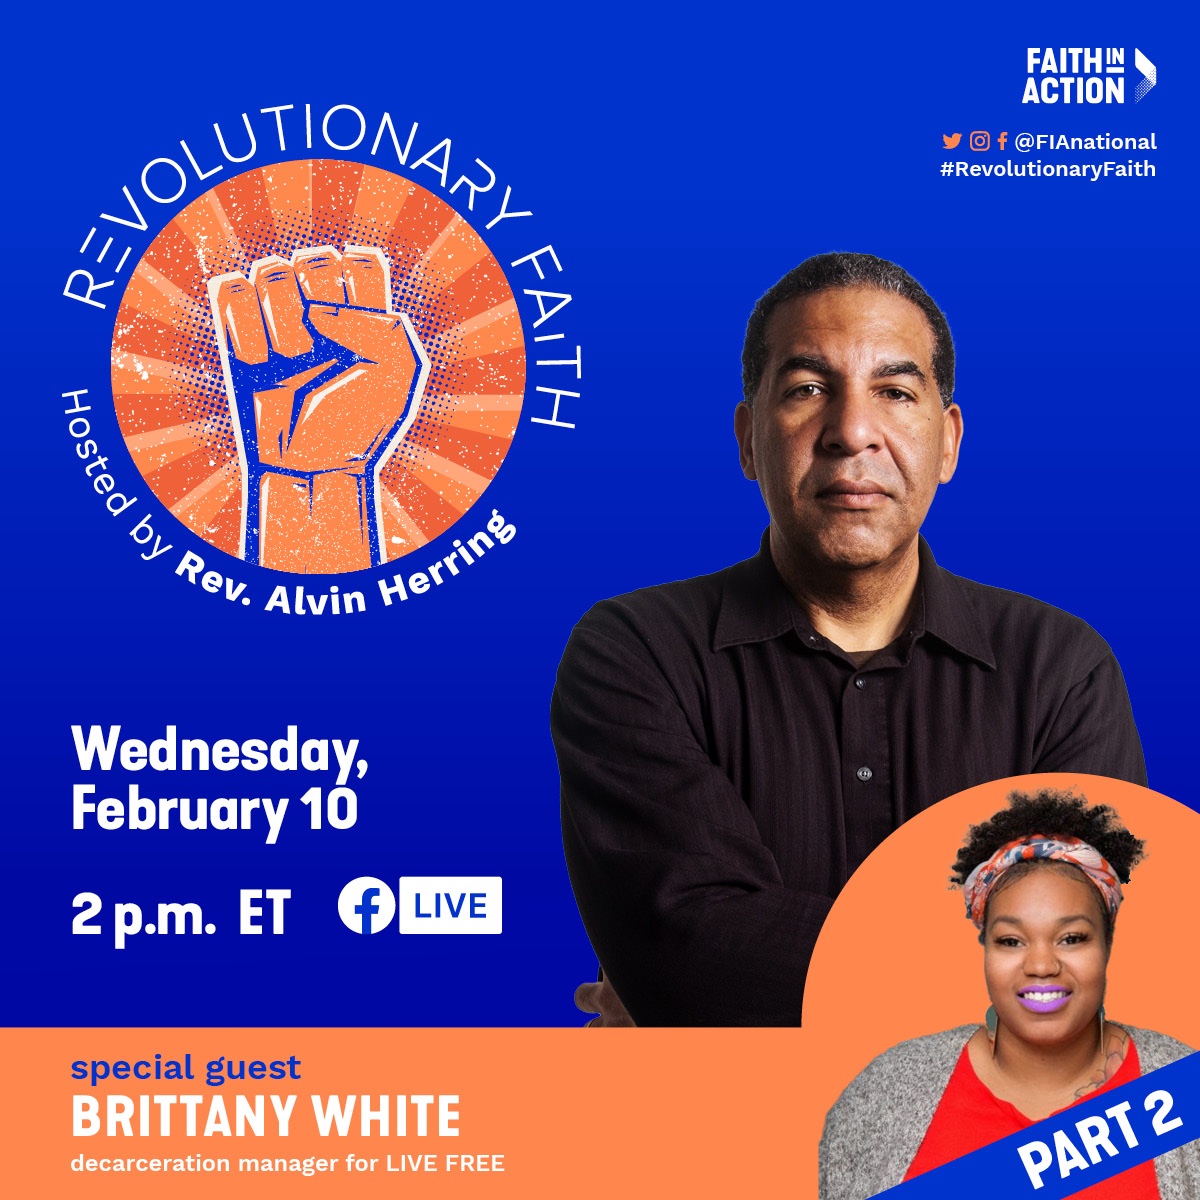 The next episode of #RevolutionaryFaith w/ @RevAlvinHerring premieres today, Feb. 10th at 2 p.m. ET & we are excited to announce that Rev. Alvin Herring will continue his conversation with @MzBrittBMW!